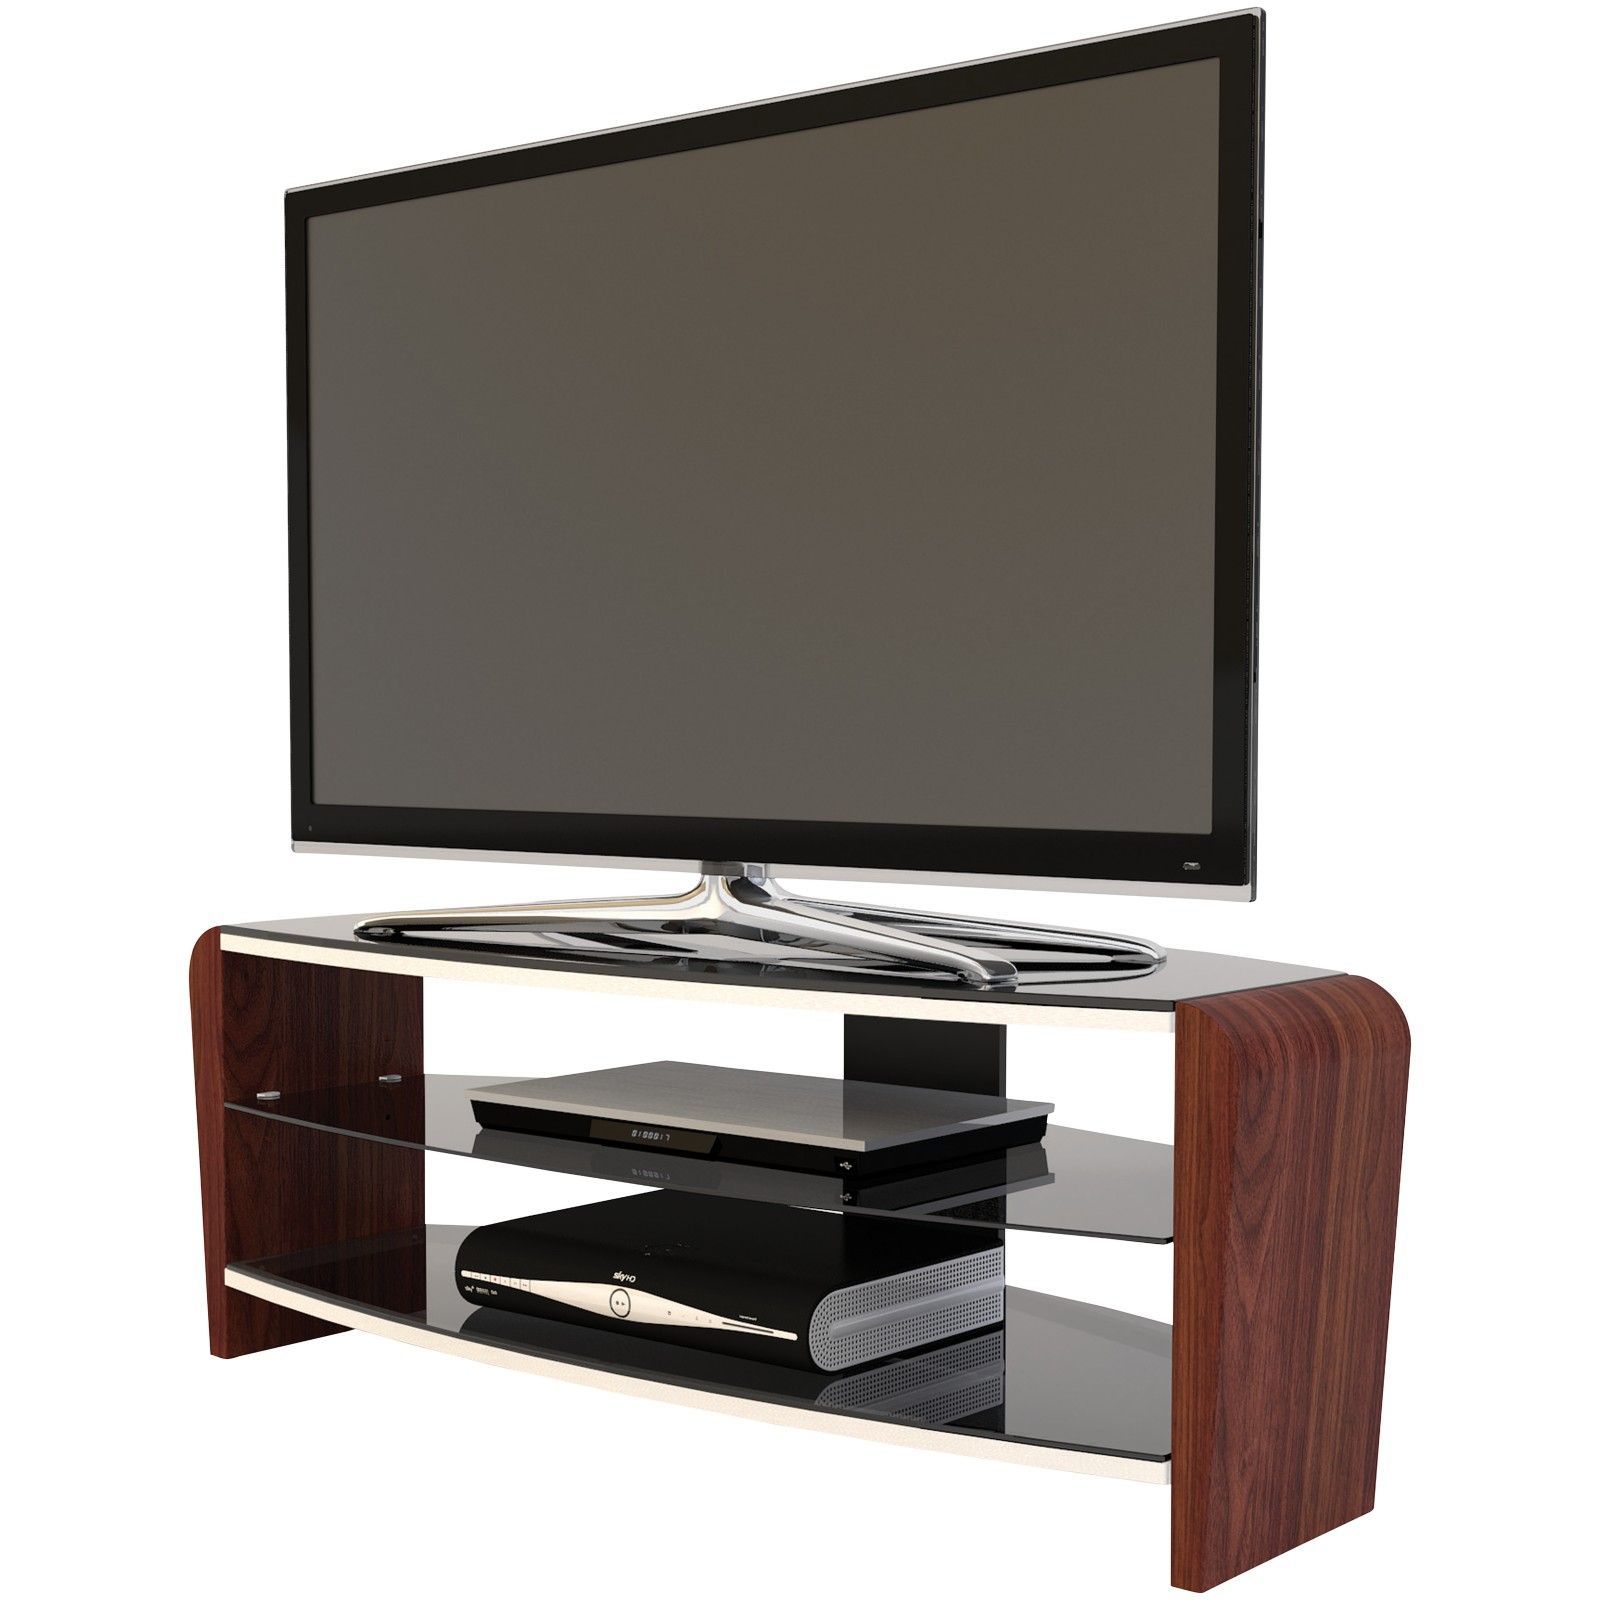 Alphason Francium 110 Tv Stand For Tvs Up To 50 On Sale In With Exhibit Corner Tv Stands (View 12 of 15)